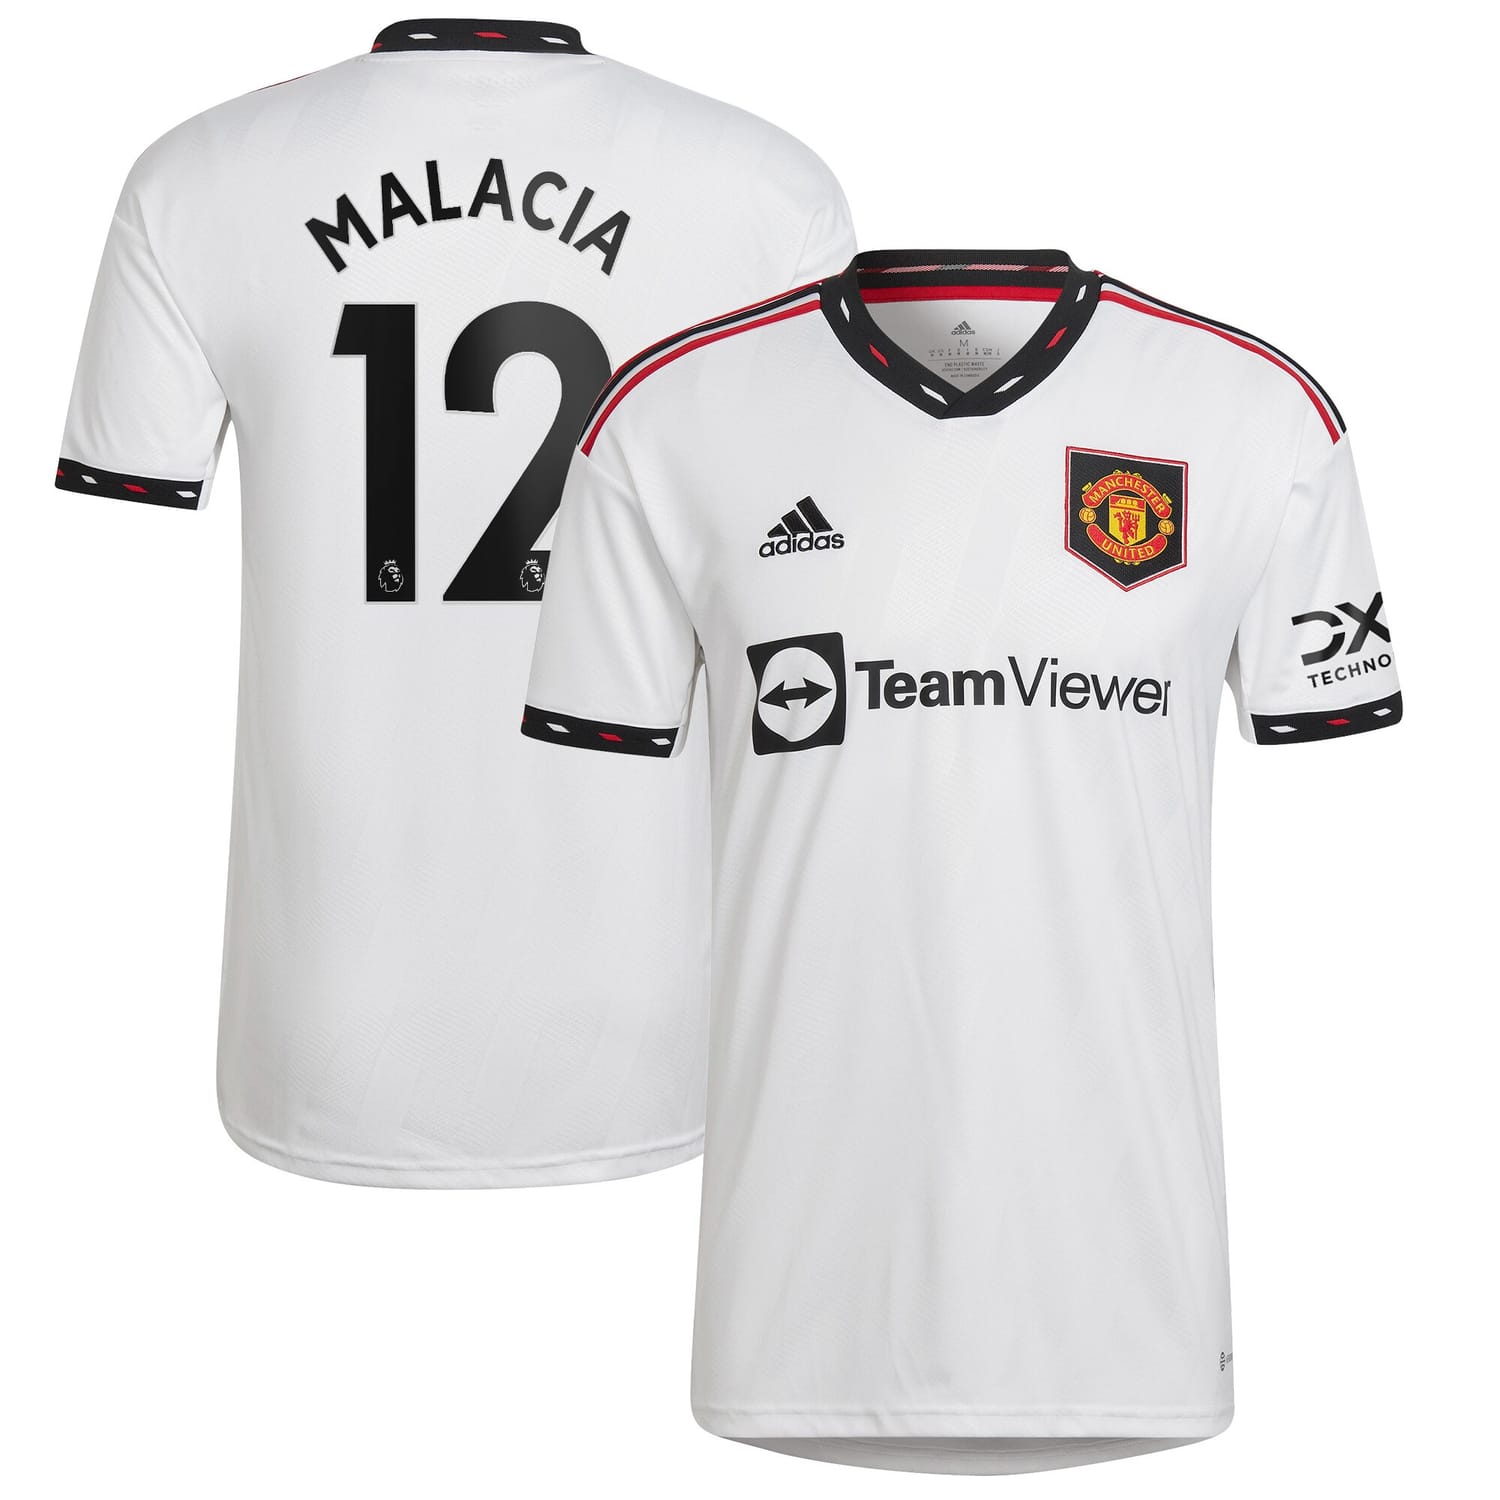 Premier League Manchester United Away Jersey Shirt 2022-23 player Tyrell Malacia 12 printing for Men